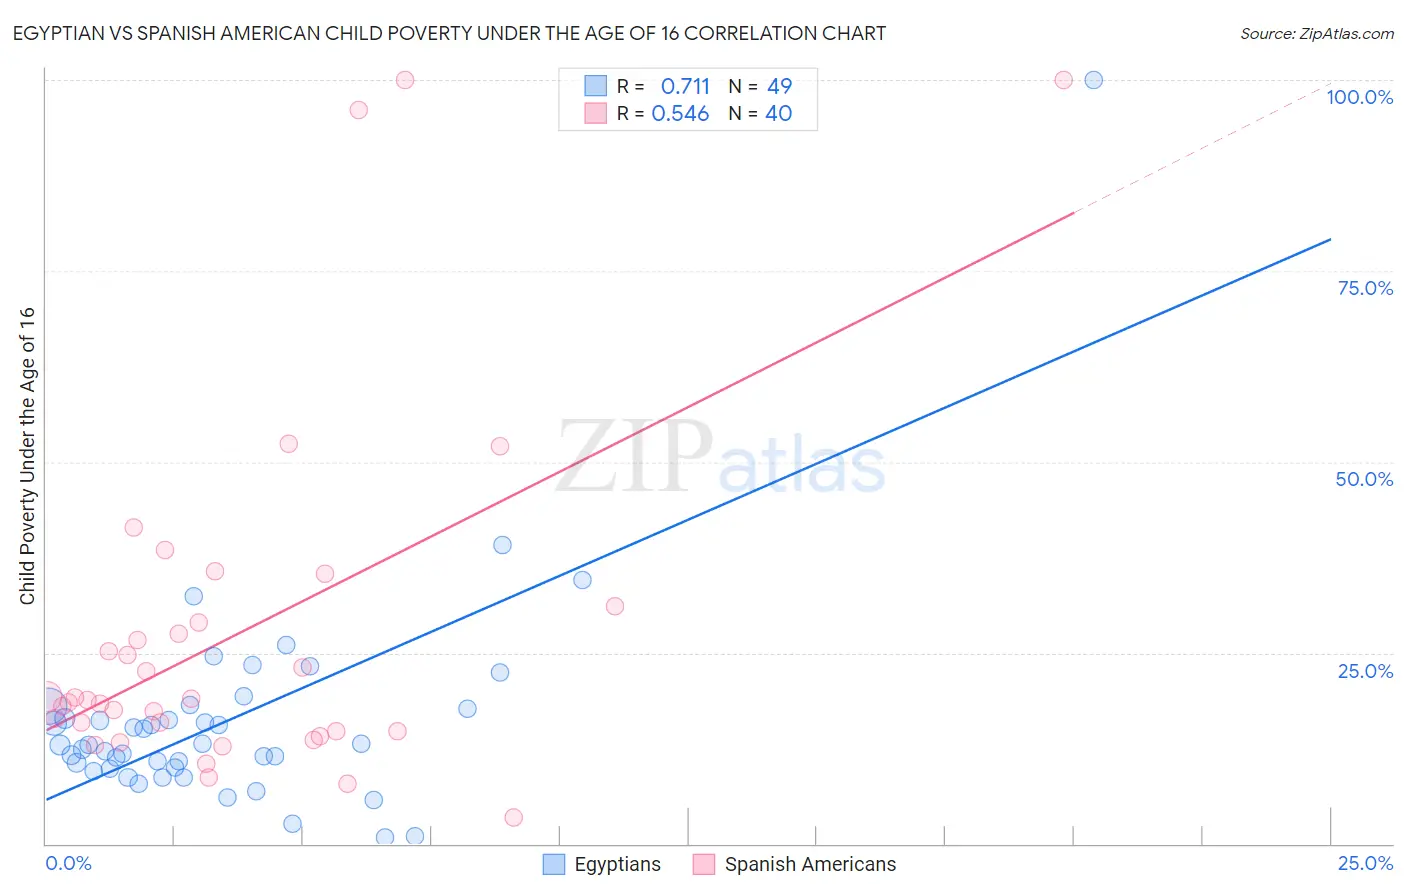 Egyptian vs Spanish American Child Poverty Under the Age of 16